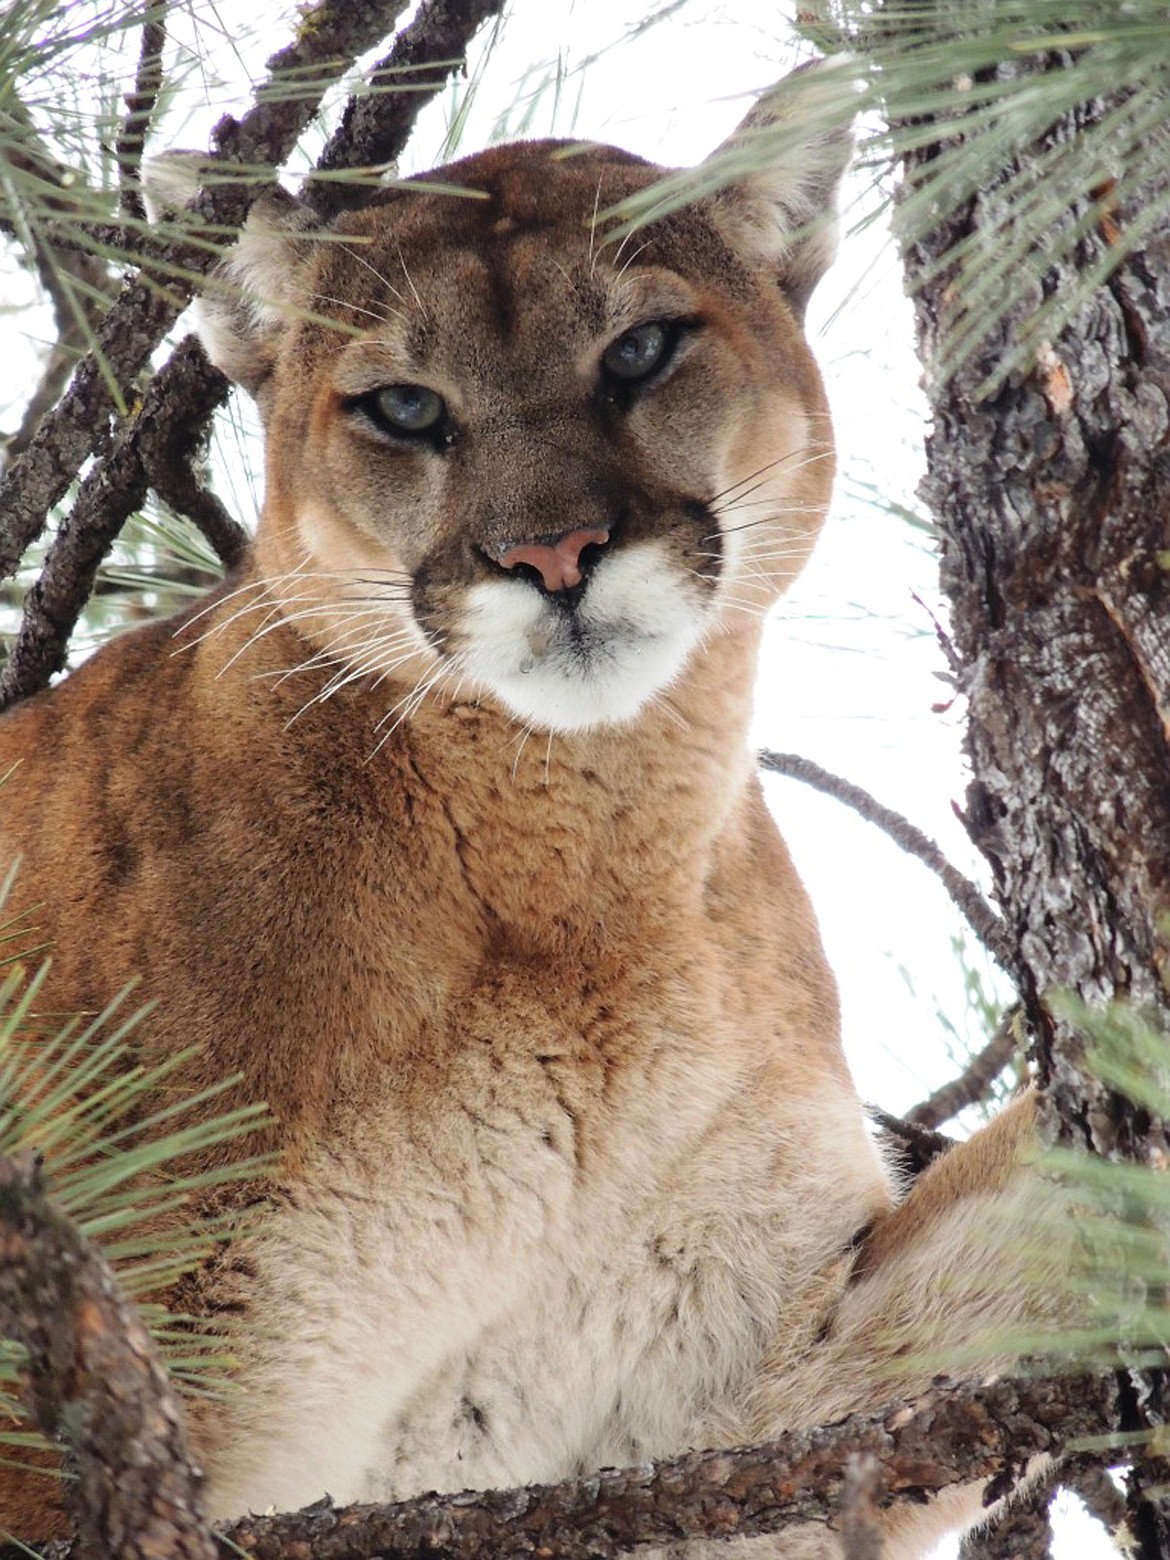 Montana Fish, Wildlife and Parks is seeking funding for a study to examine the mountain lion population in the state. (Fish. Wildlife &amp; Parks photo)